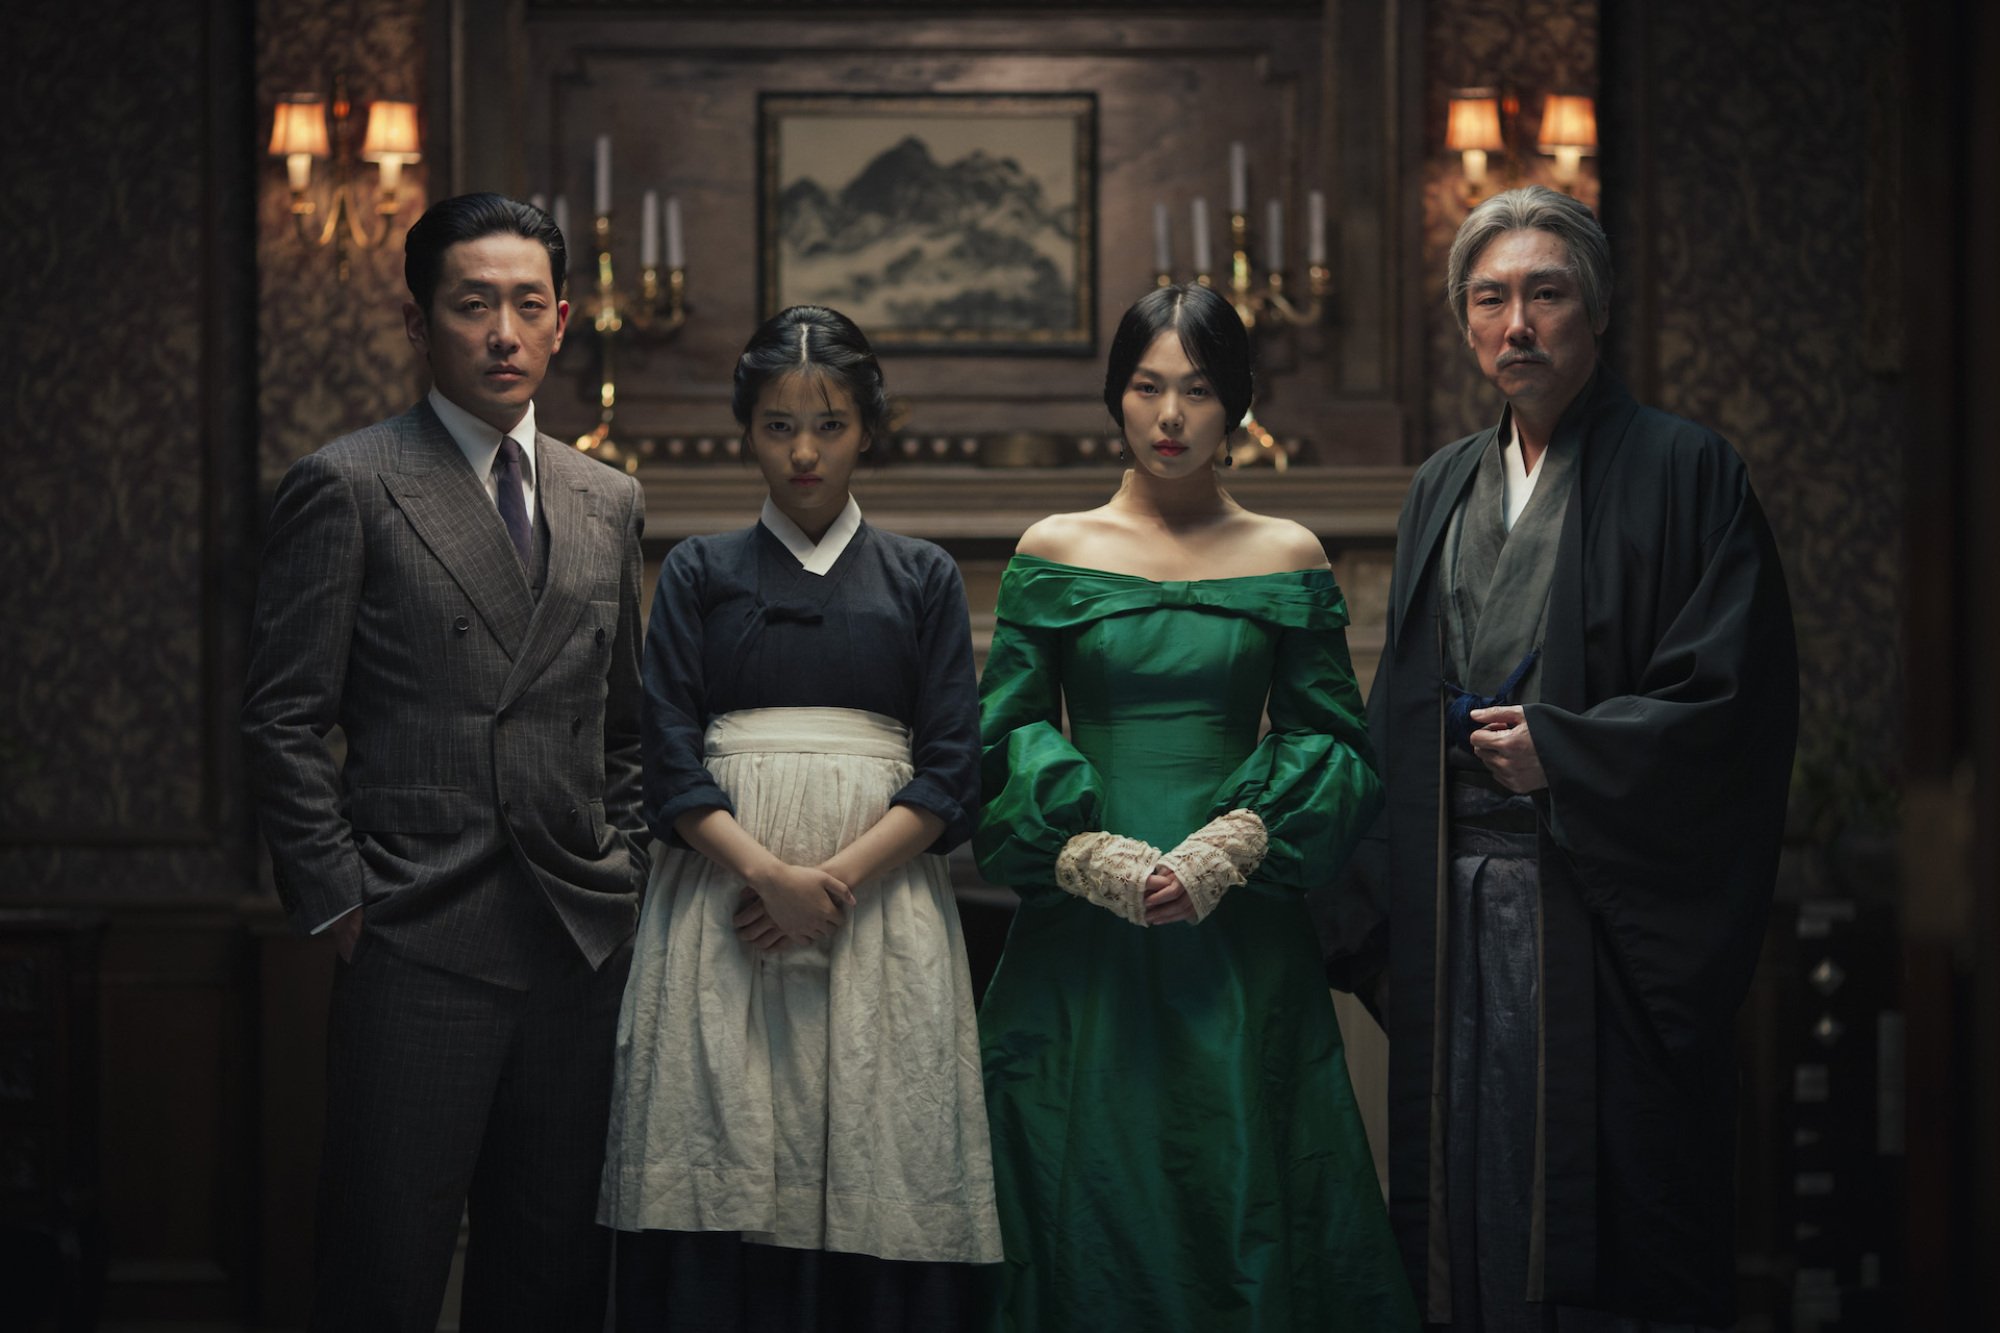 Two Asian men, one in a suit and the other in traditional clothes, stand around two Asian women, one of whom is in a maid's outfit, the other in a green dress.